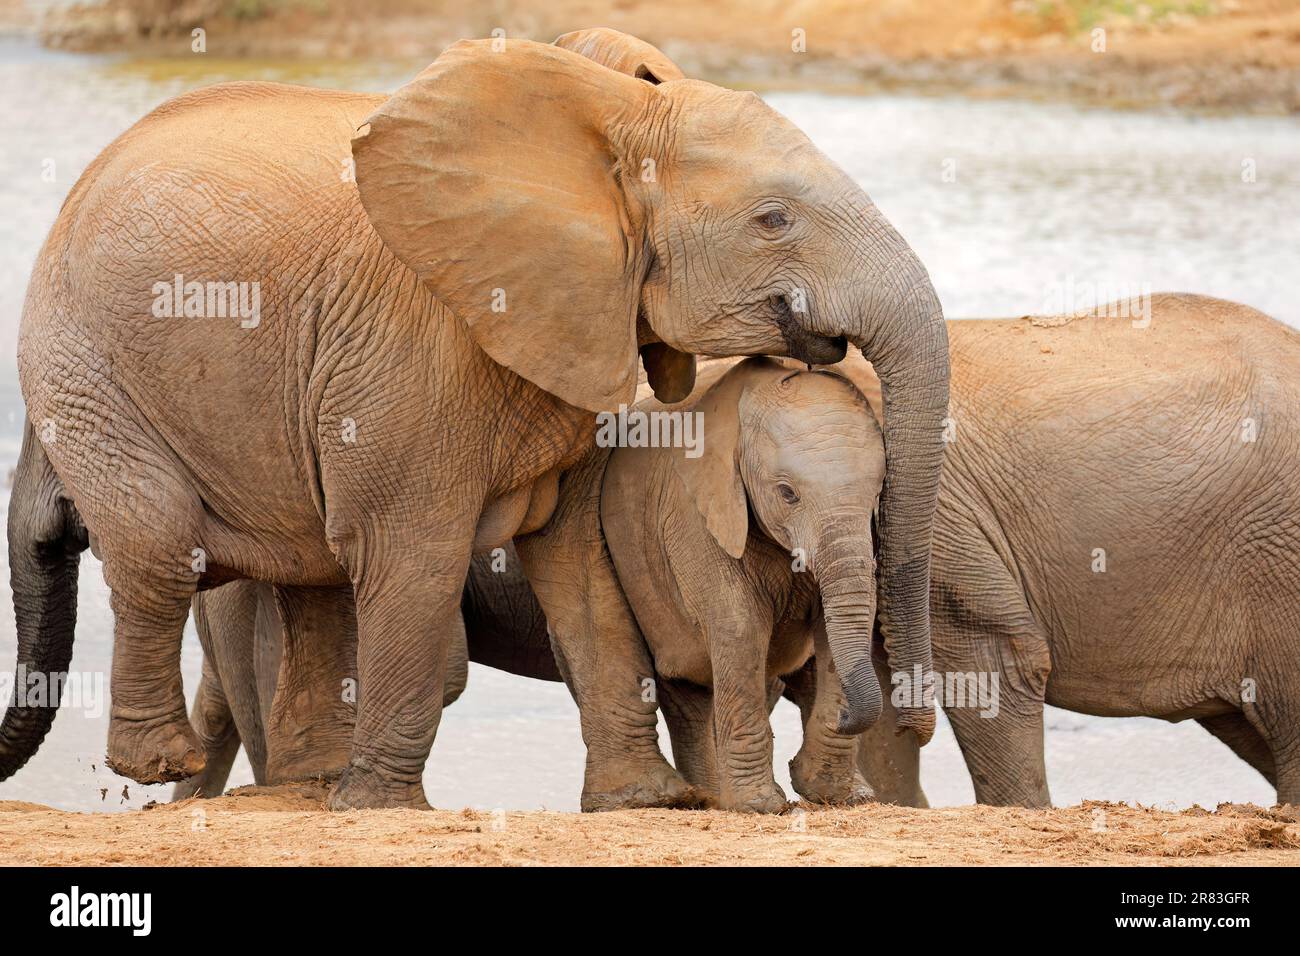 African elephant (Loxodonta africana) cow with calf, Addo Elephant National park, South Africa Stock Photo